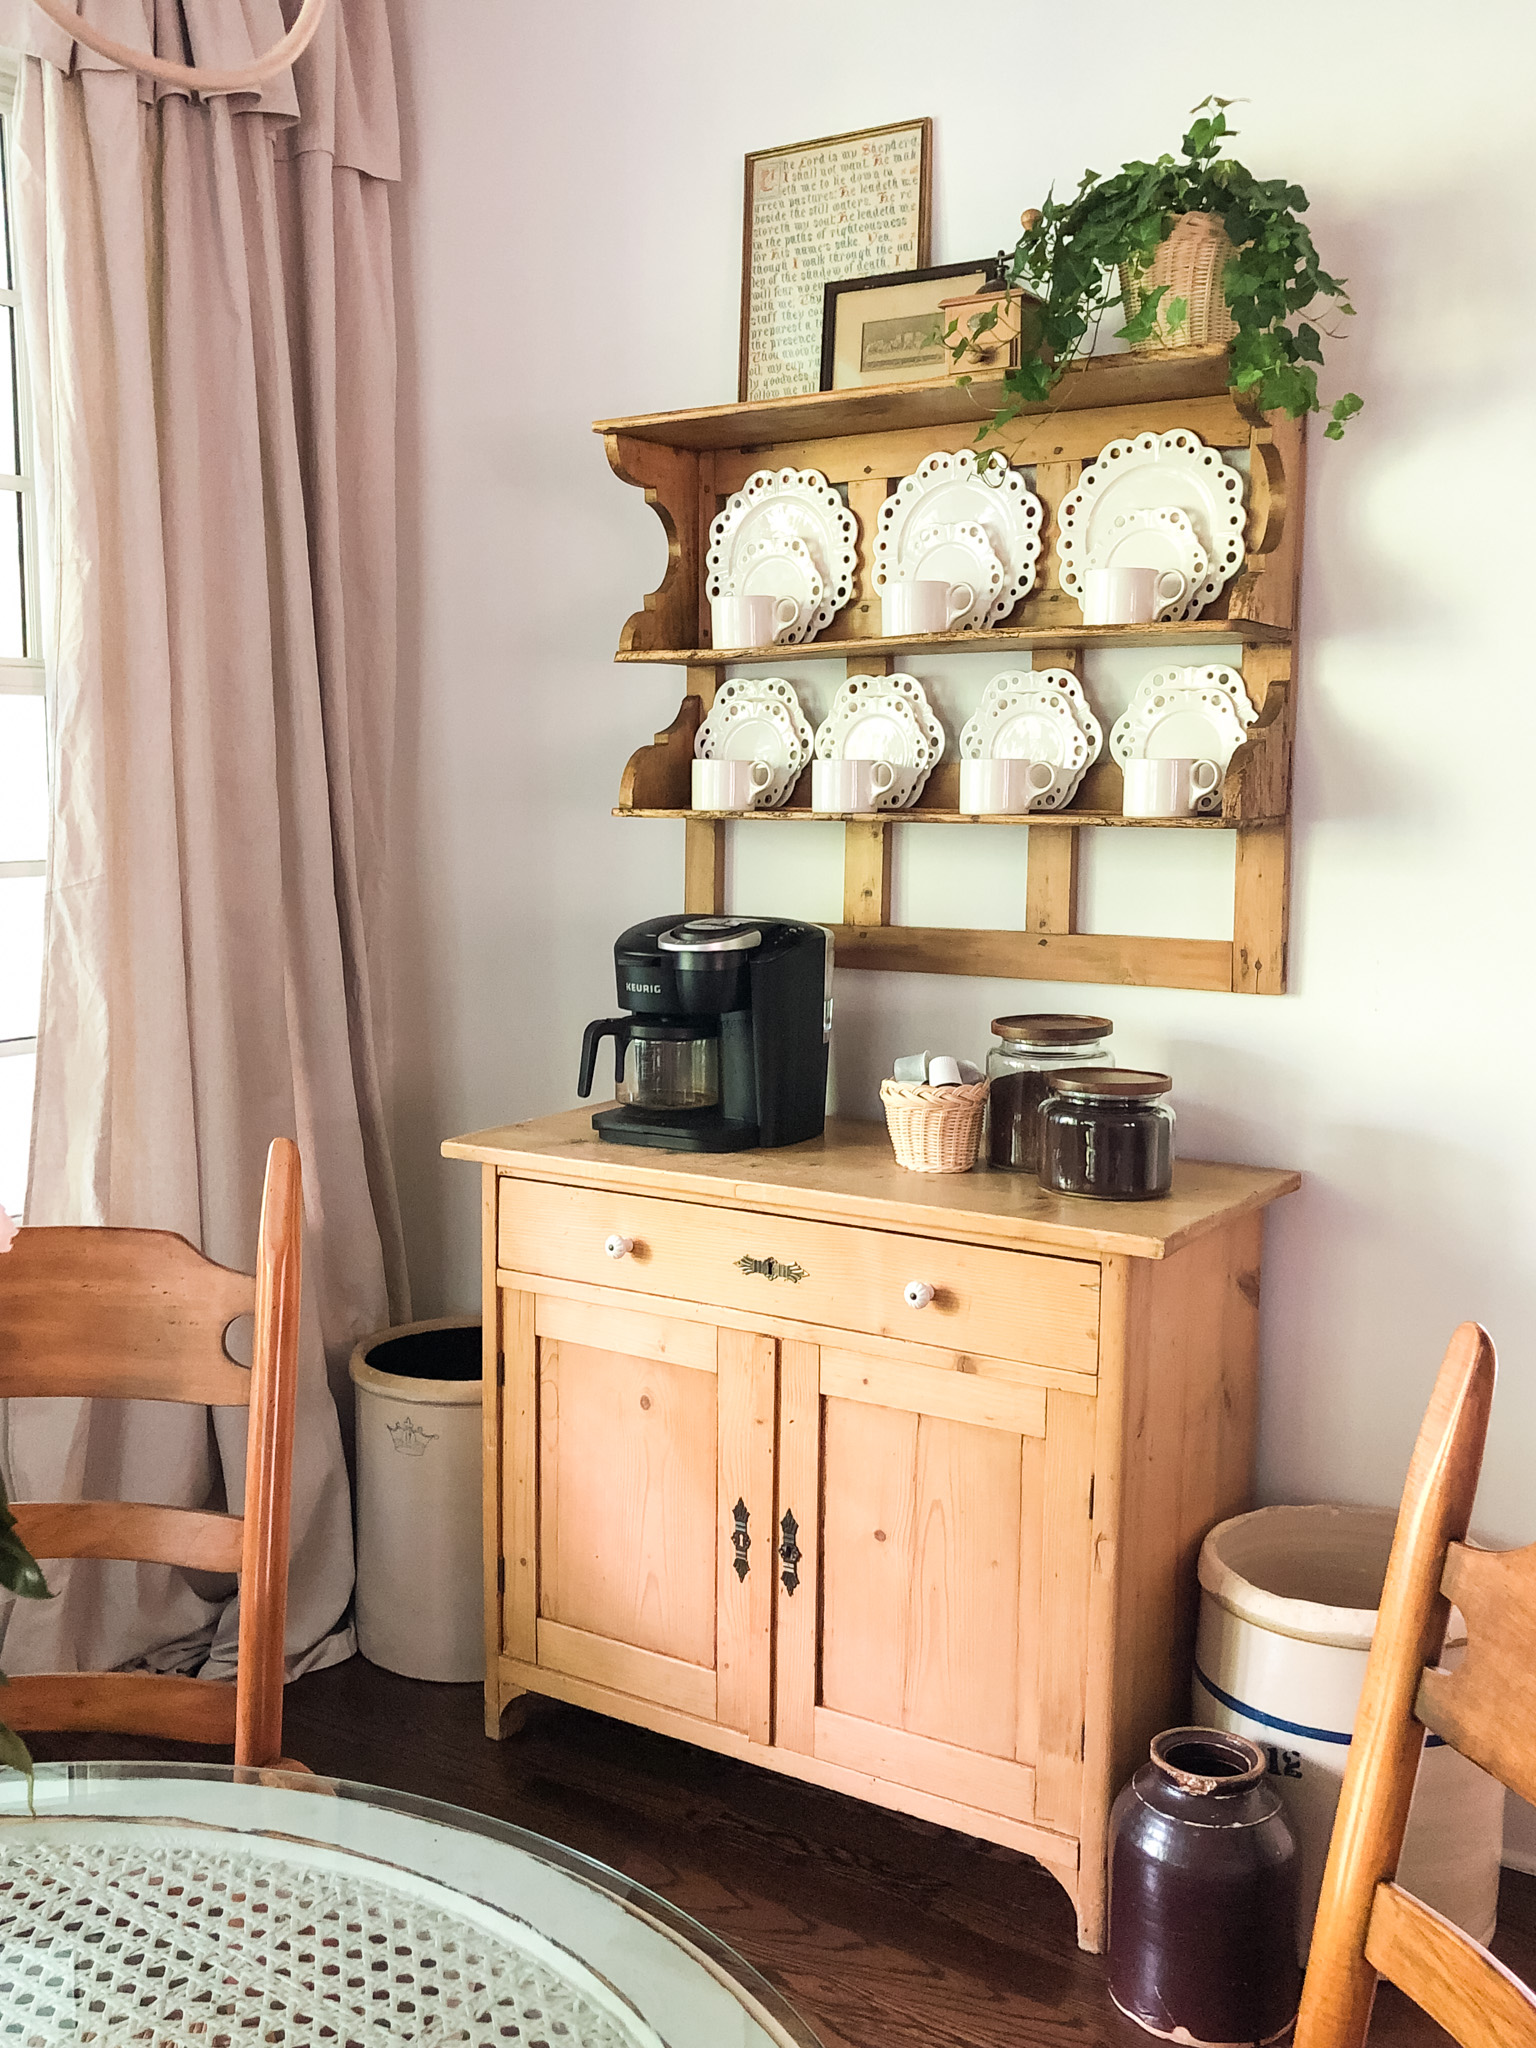 Antique English Pine Cabinet and Plate Rack turned Home Coffee Bar